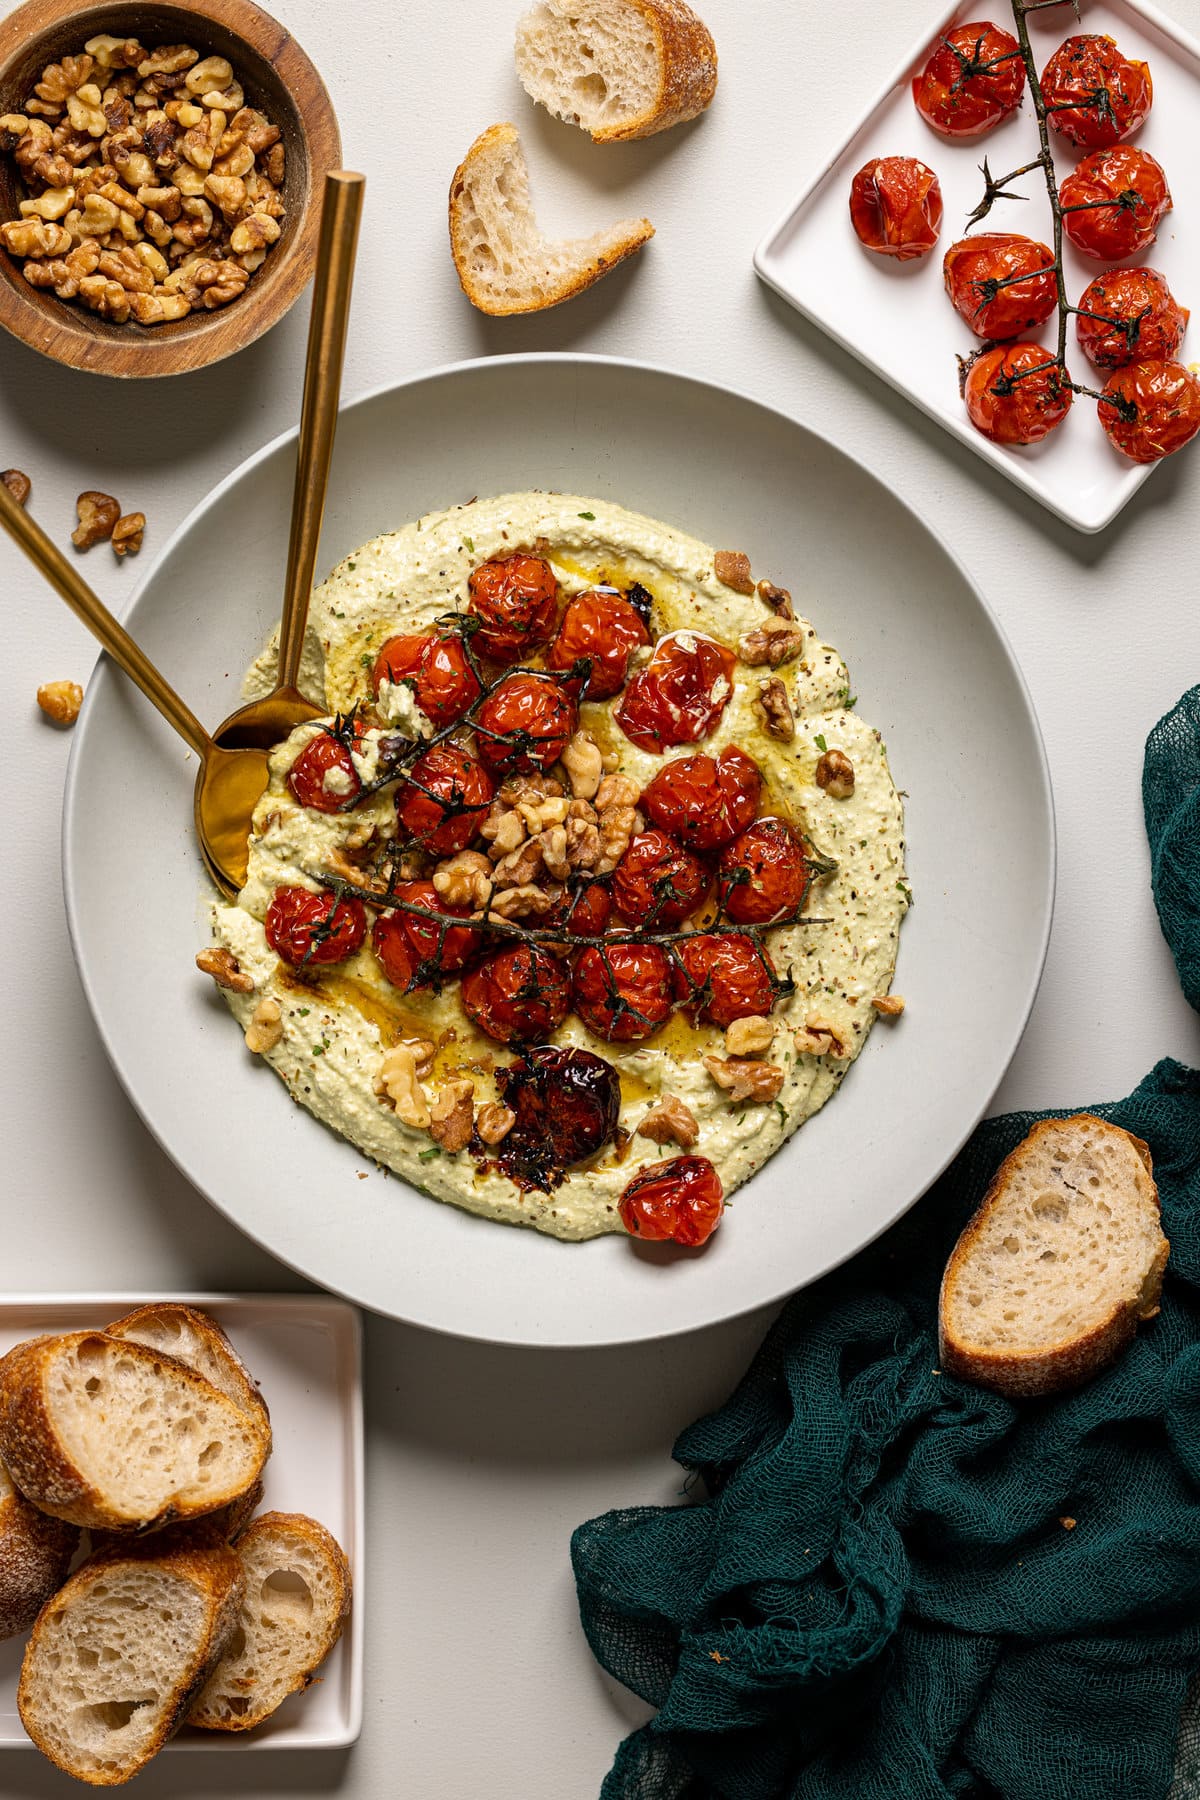 Overview shot of feta dip in a white low bowl with a spoon, fork, side of roasted tomatoes, bread, and nuts.